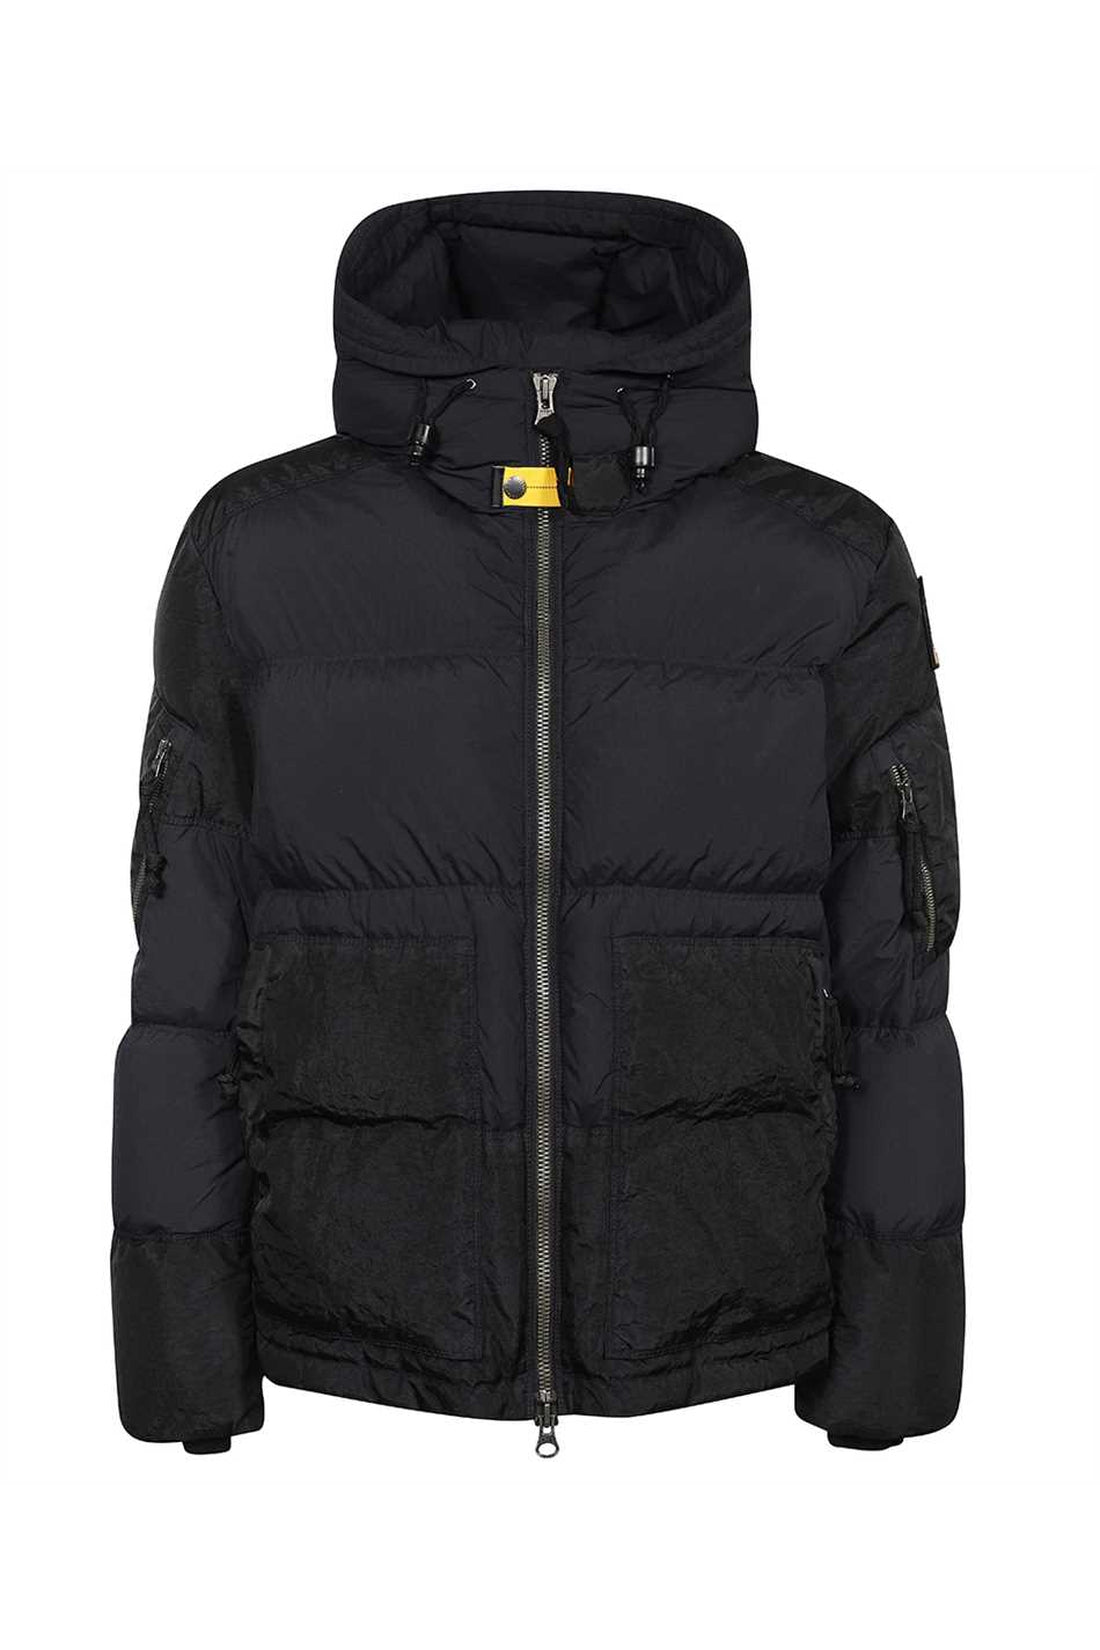 Parajumpers-OUTLET-SALE-Tomcat hooded down jacket-ARCHIVIST